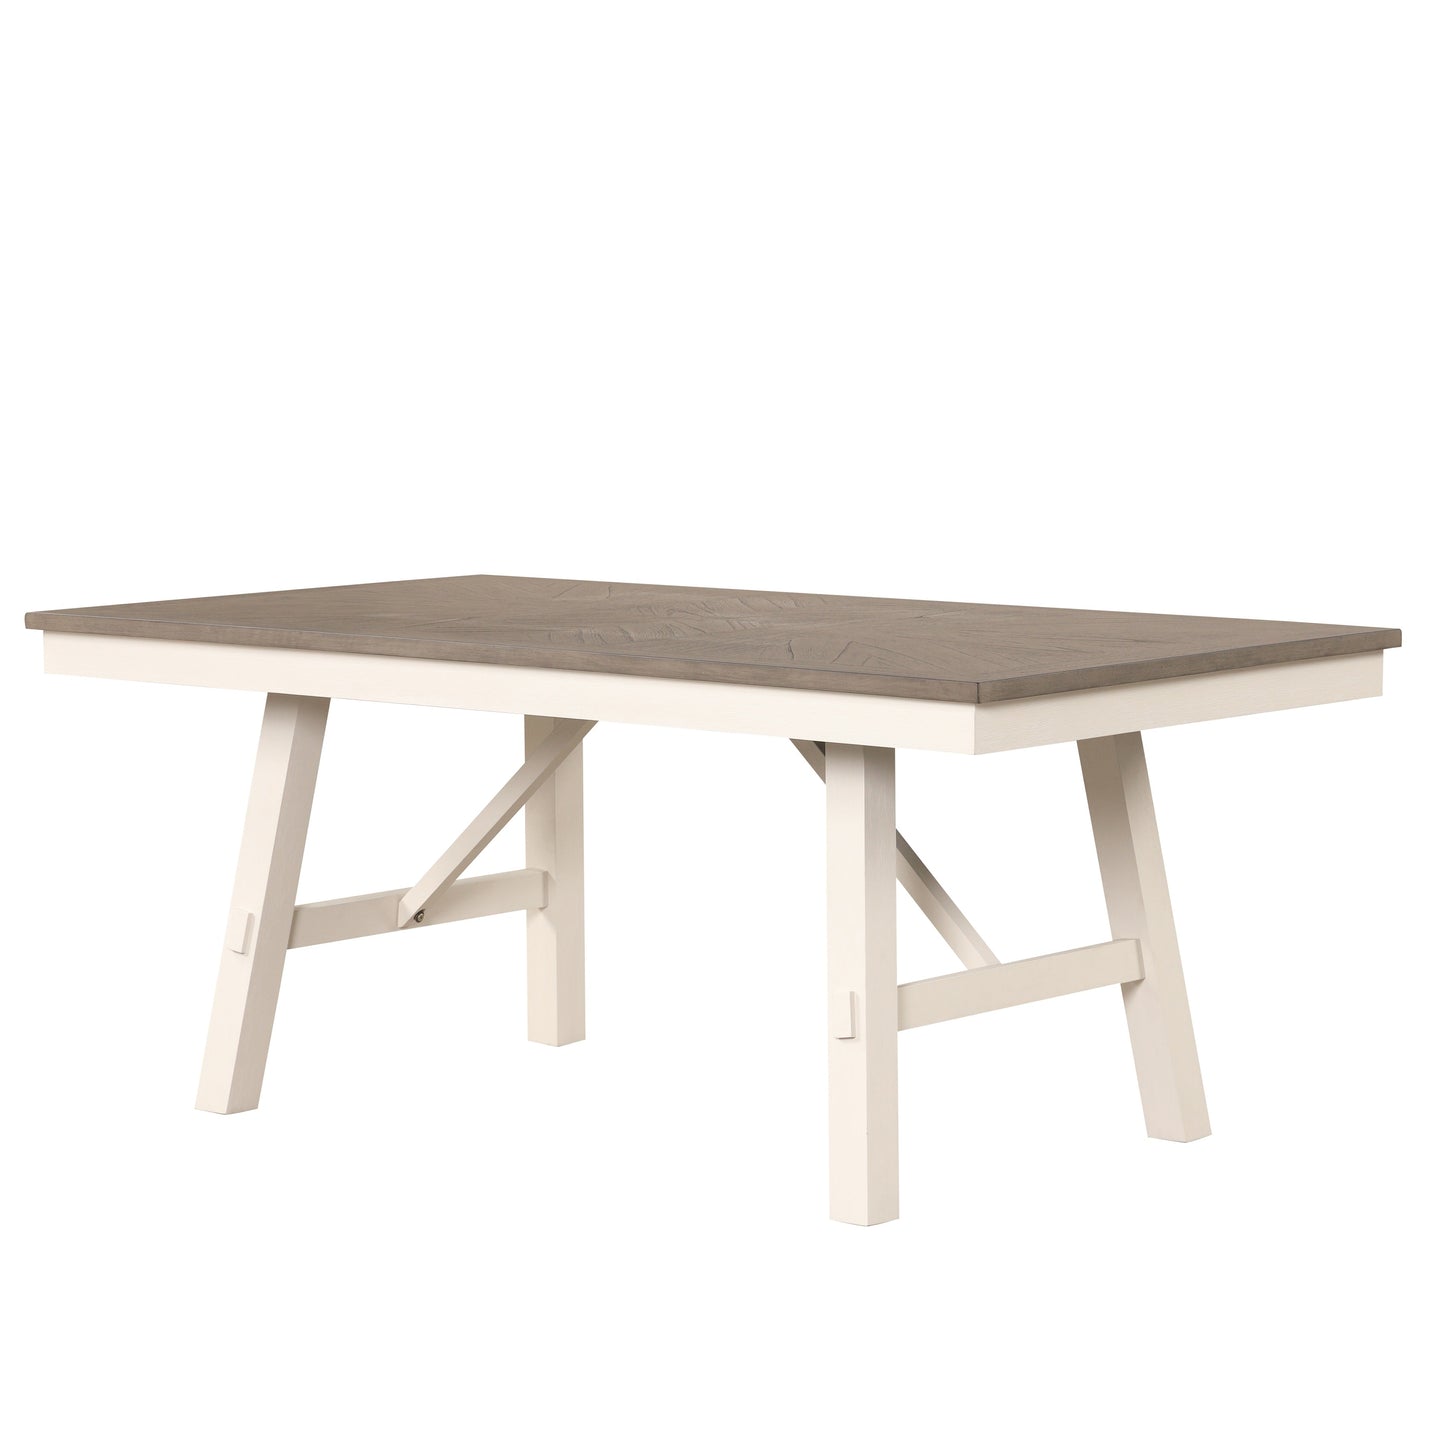 Roundhill Furniture Fasena Rectangular Trestle Dining Table, Rustic Gray and Off White Finish